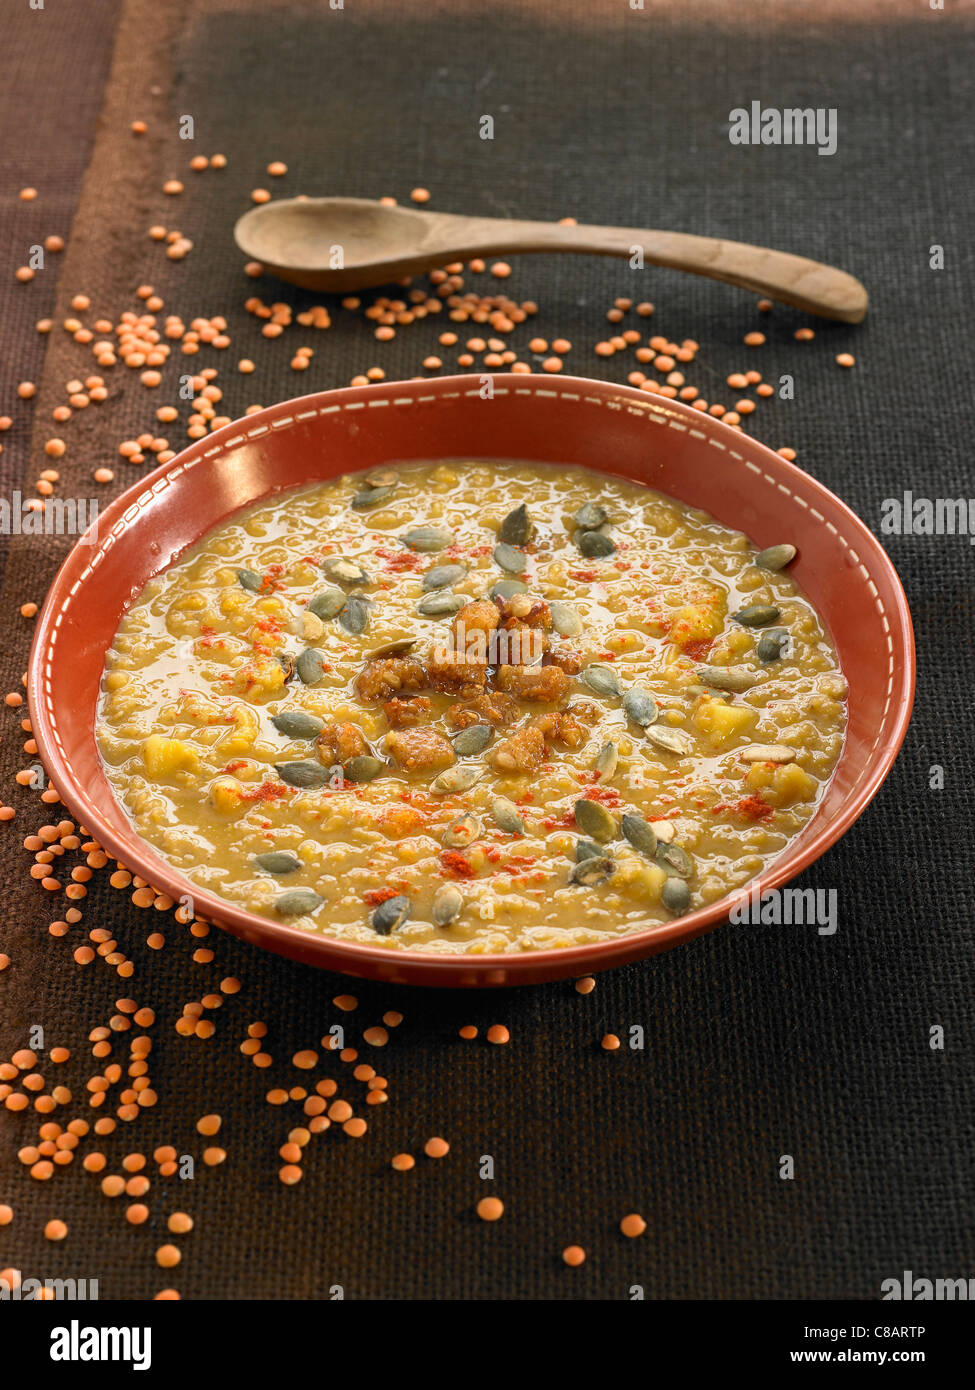 Lentil and tempeth soup Stock Photo